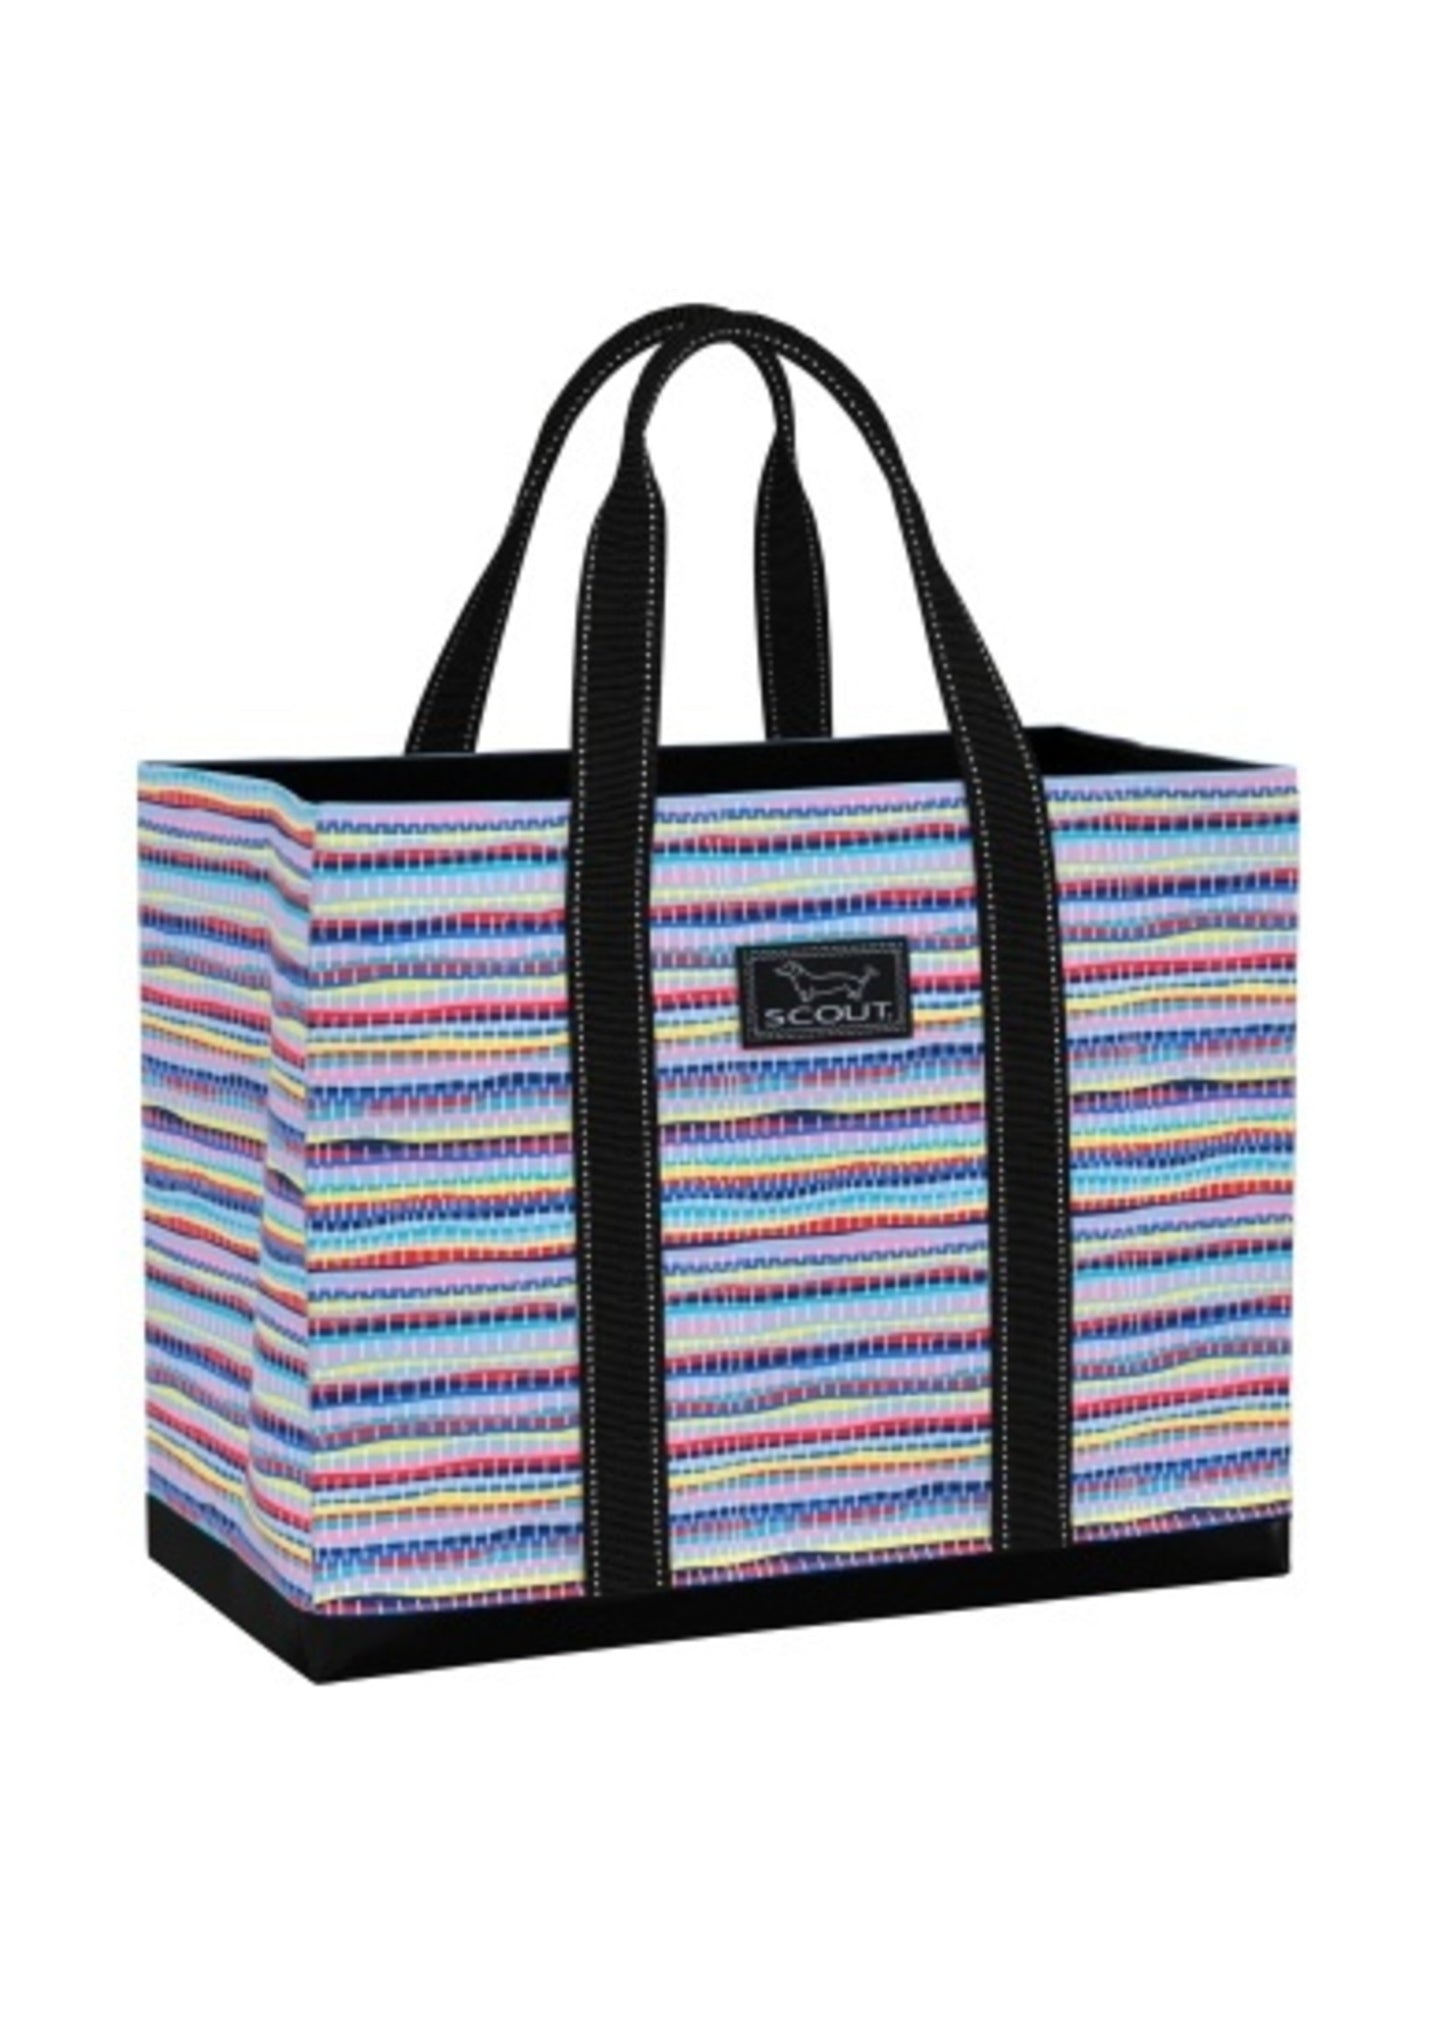 Scout Original Deano Tote Luggage, Totes in Rag King at Wrapsody